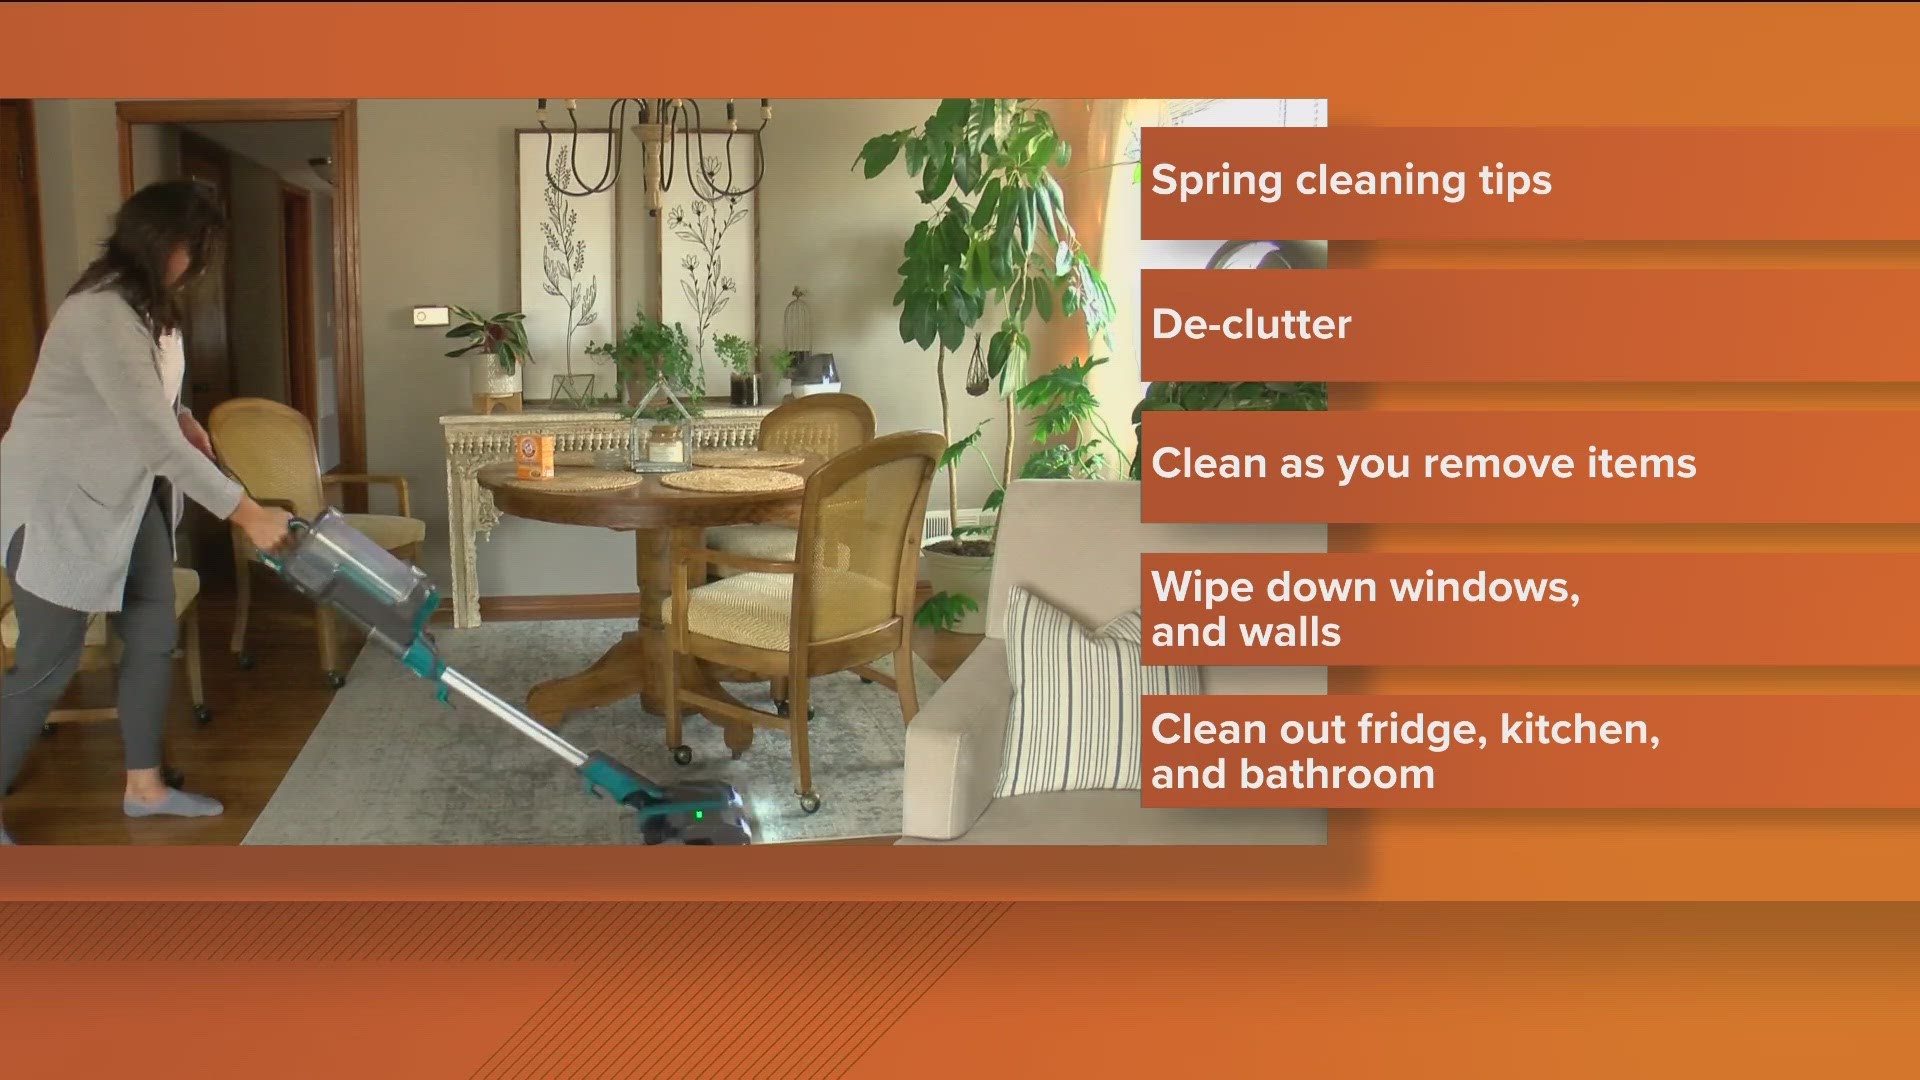 If you're planning to spring clean your home this year, you're likely to remove months or even years of set-in dirt, grime and clutter.